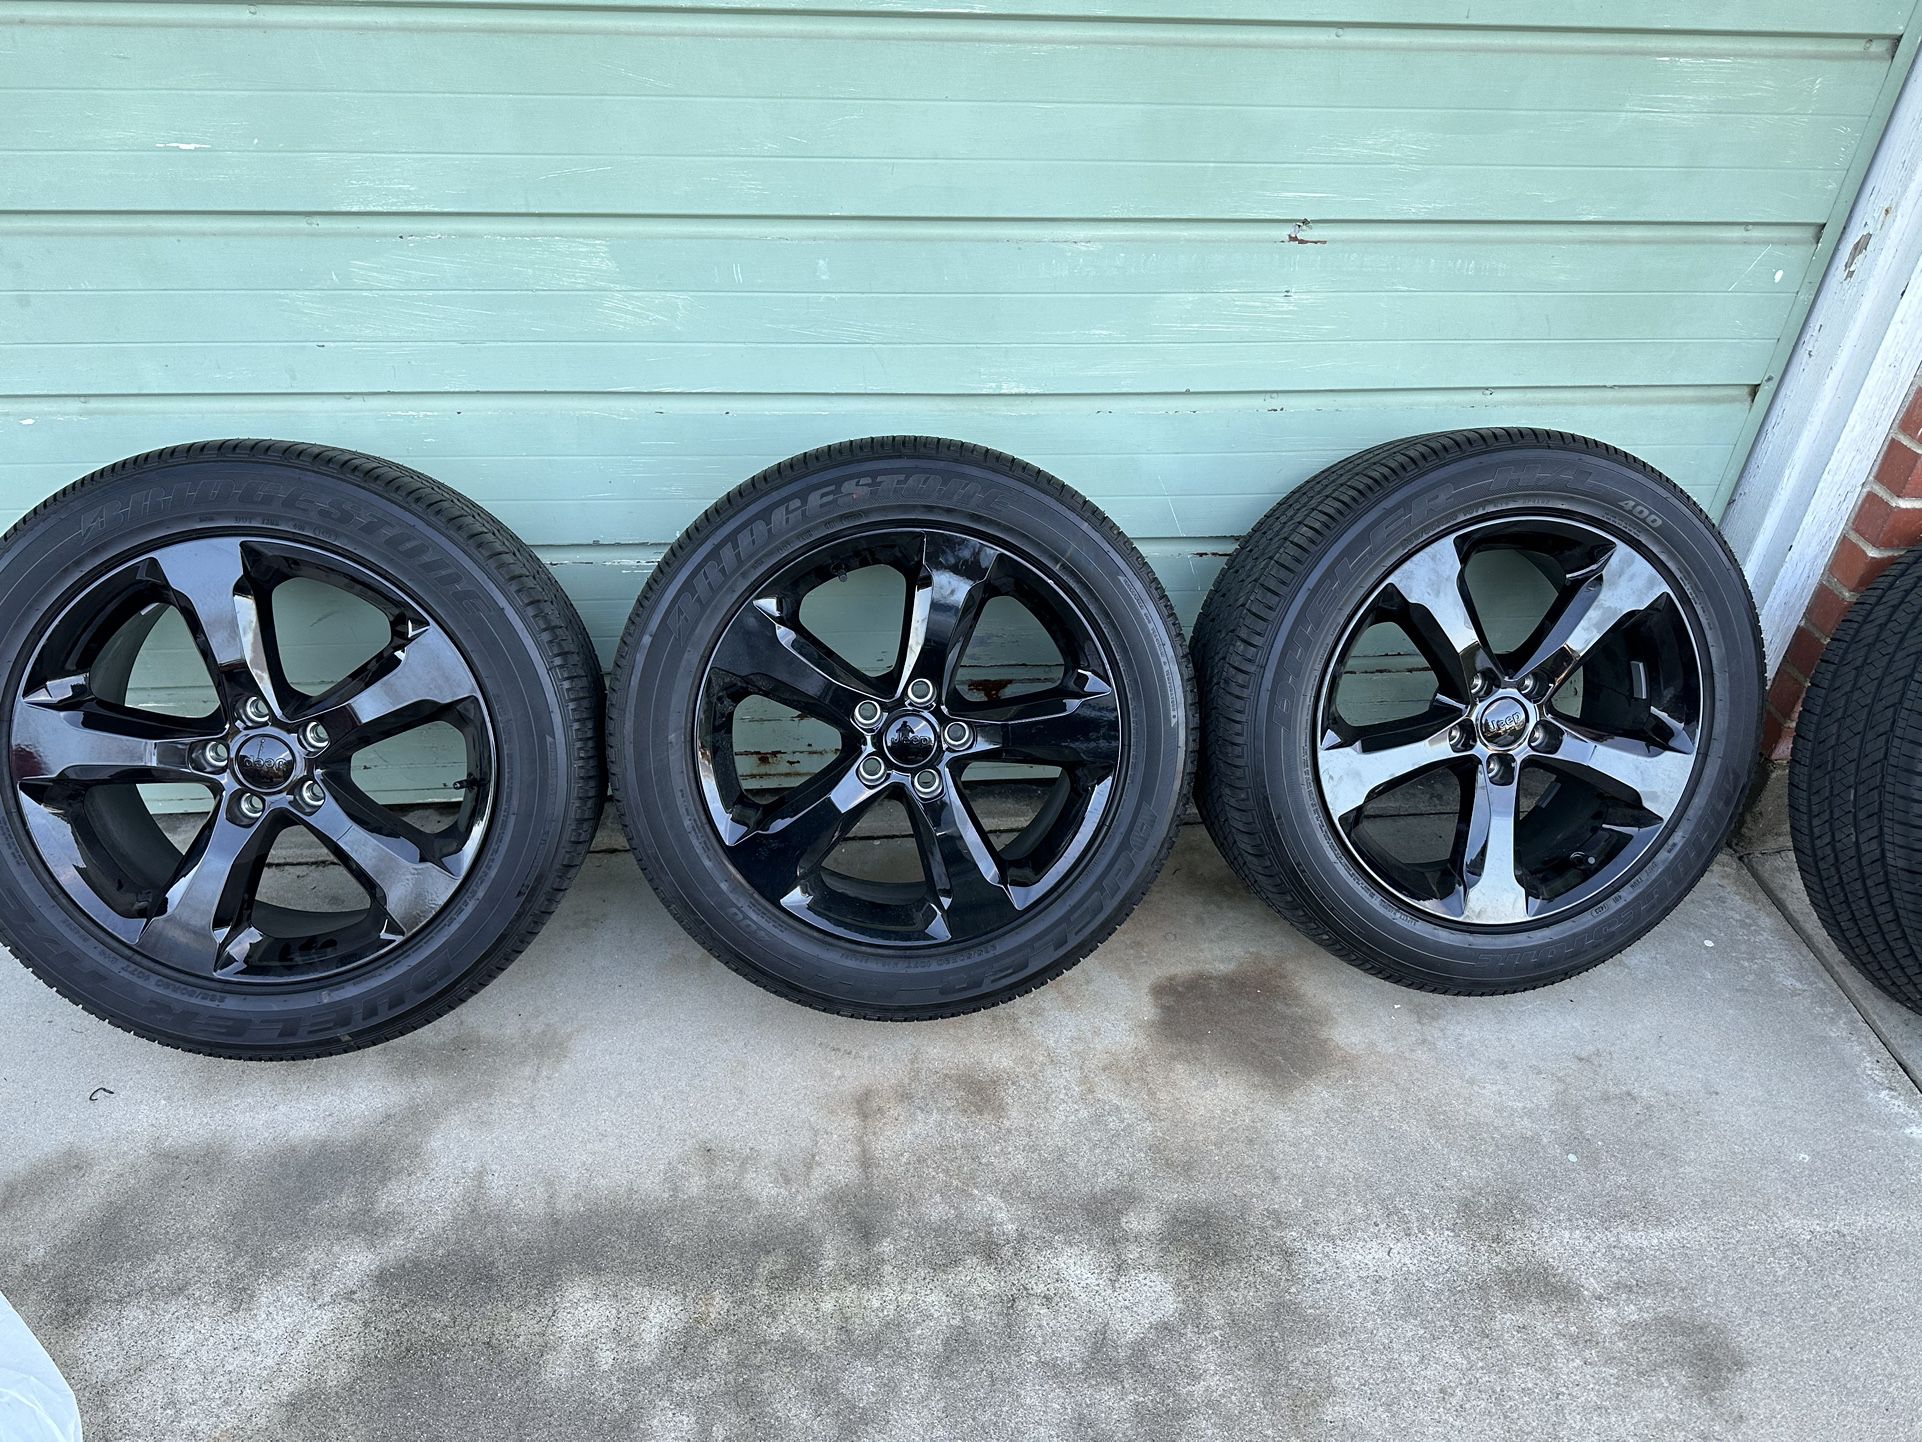 20” OEM Jeep Wheels and Tires, 20x8.5 +50mm Offset